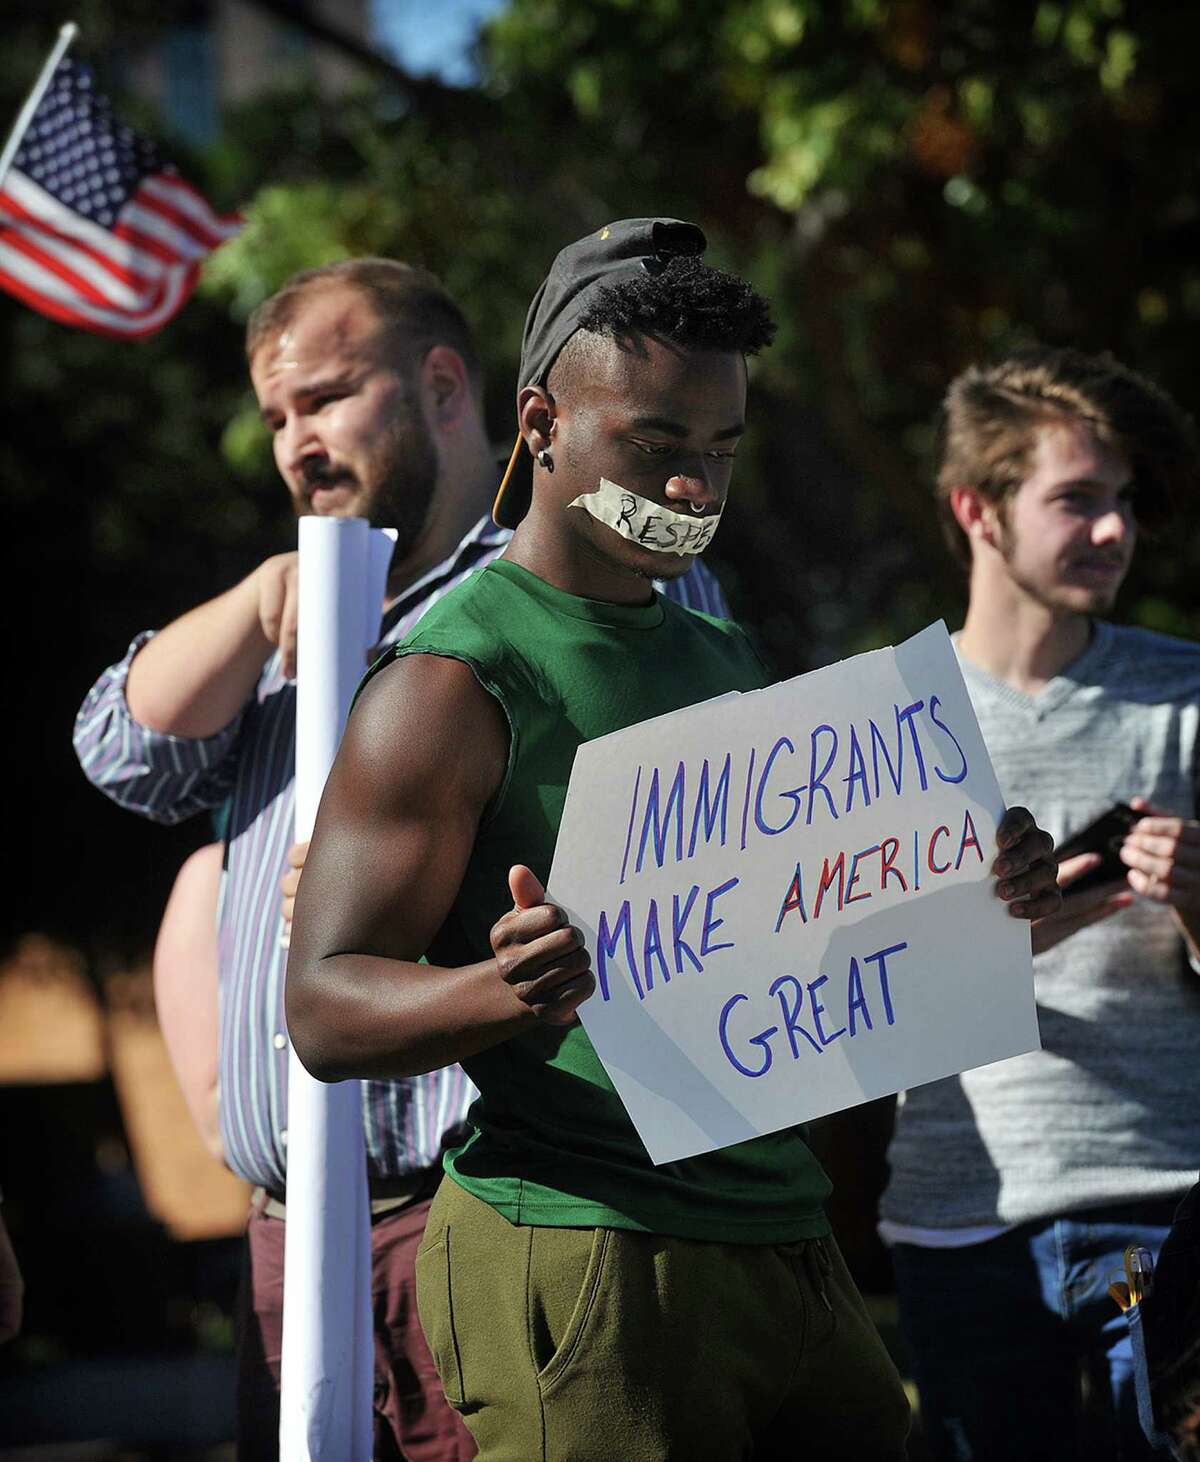 Midwestern State University nursing student Richard Brown was one of about 70 students who came out to stage a peaceful protest against hate, intolerance and president elect Donald Trump, on campus Wednesday afternoon in Wichita Falls, Texas. A smaller group held signs supporting Trump/Pence. (Torin Halsey/Wichita Falls Times Record News via AP)